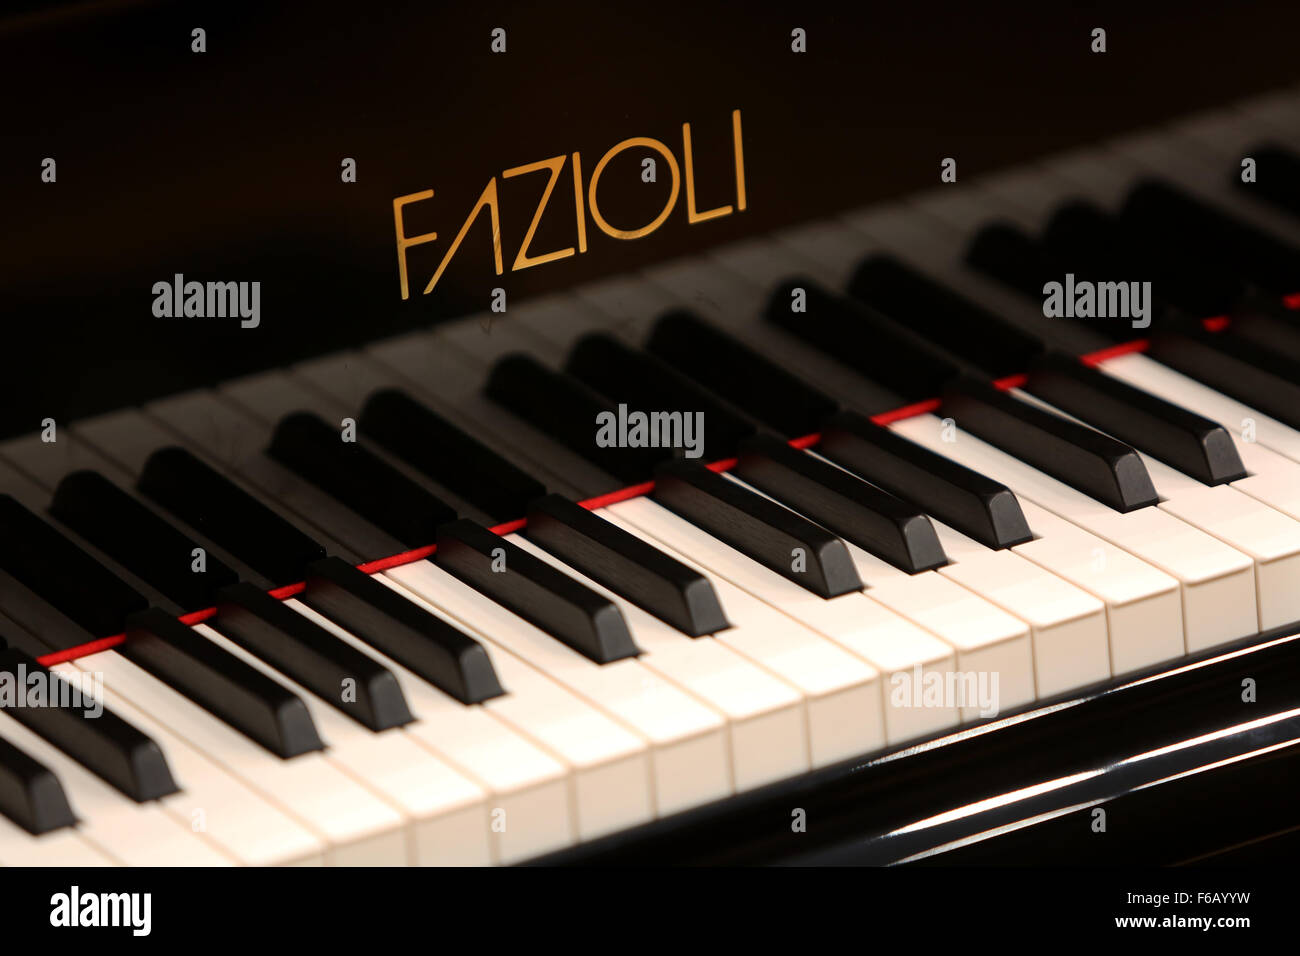 Close up photograph of an expensive limited edition Fazioli piano, made in Sacile, Italy. Stock Photo